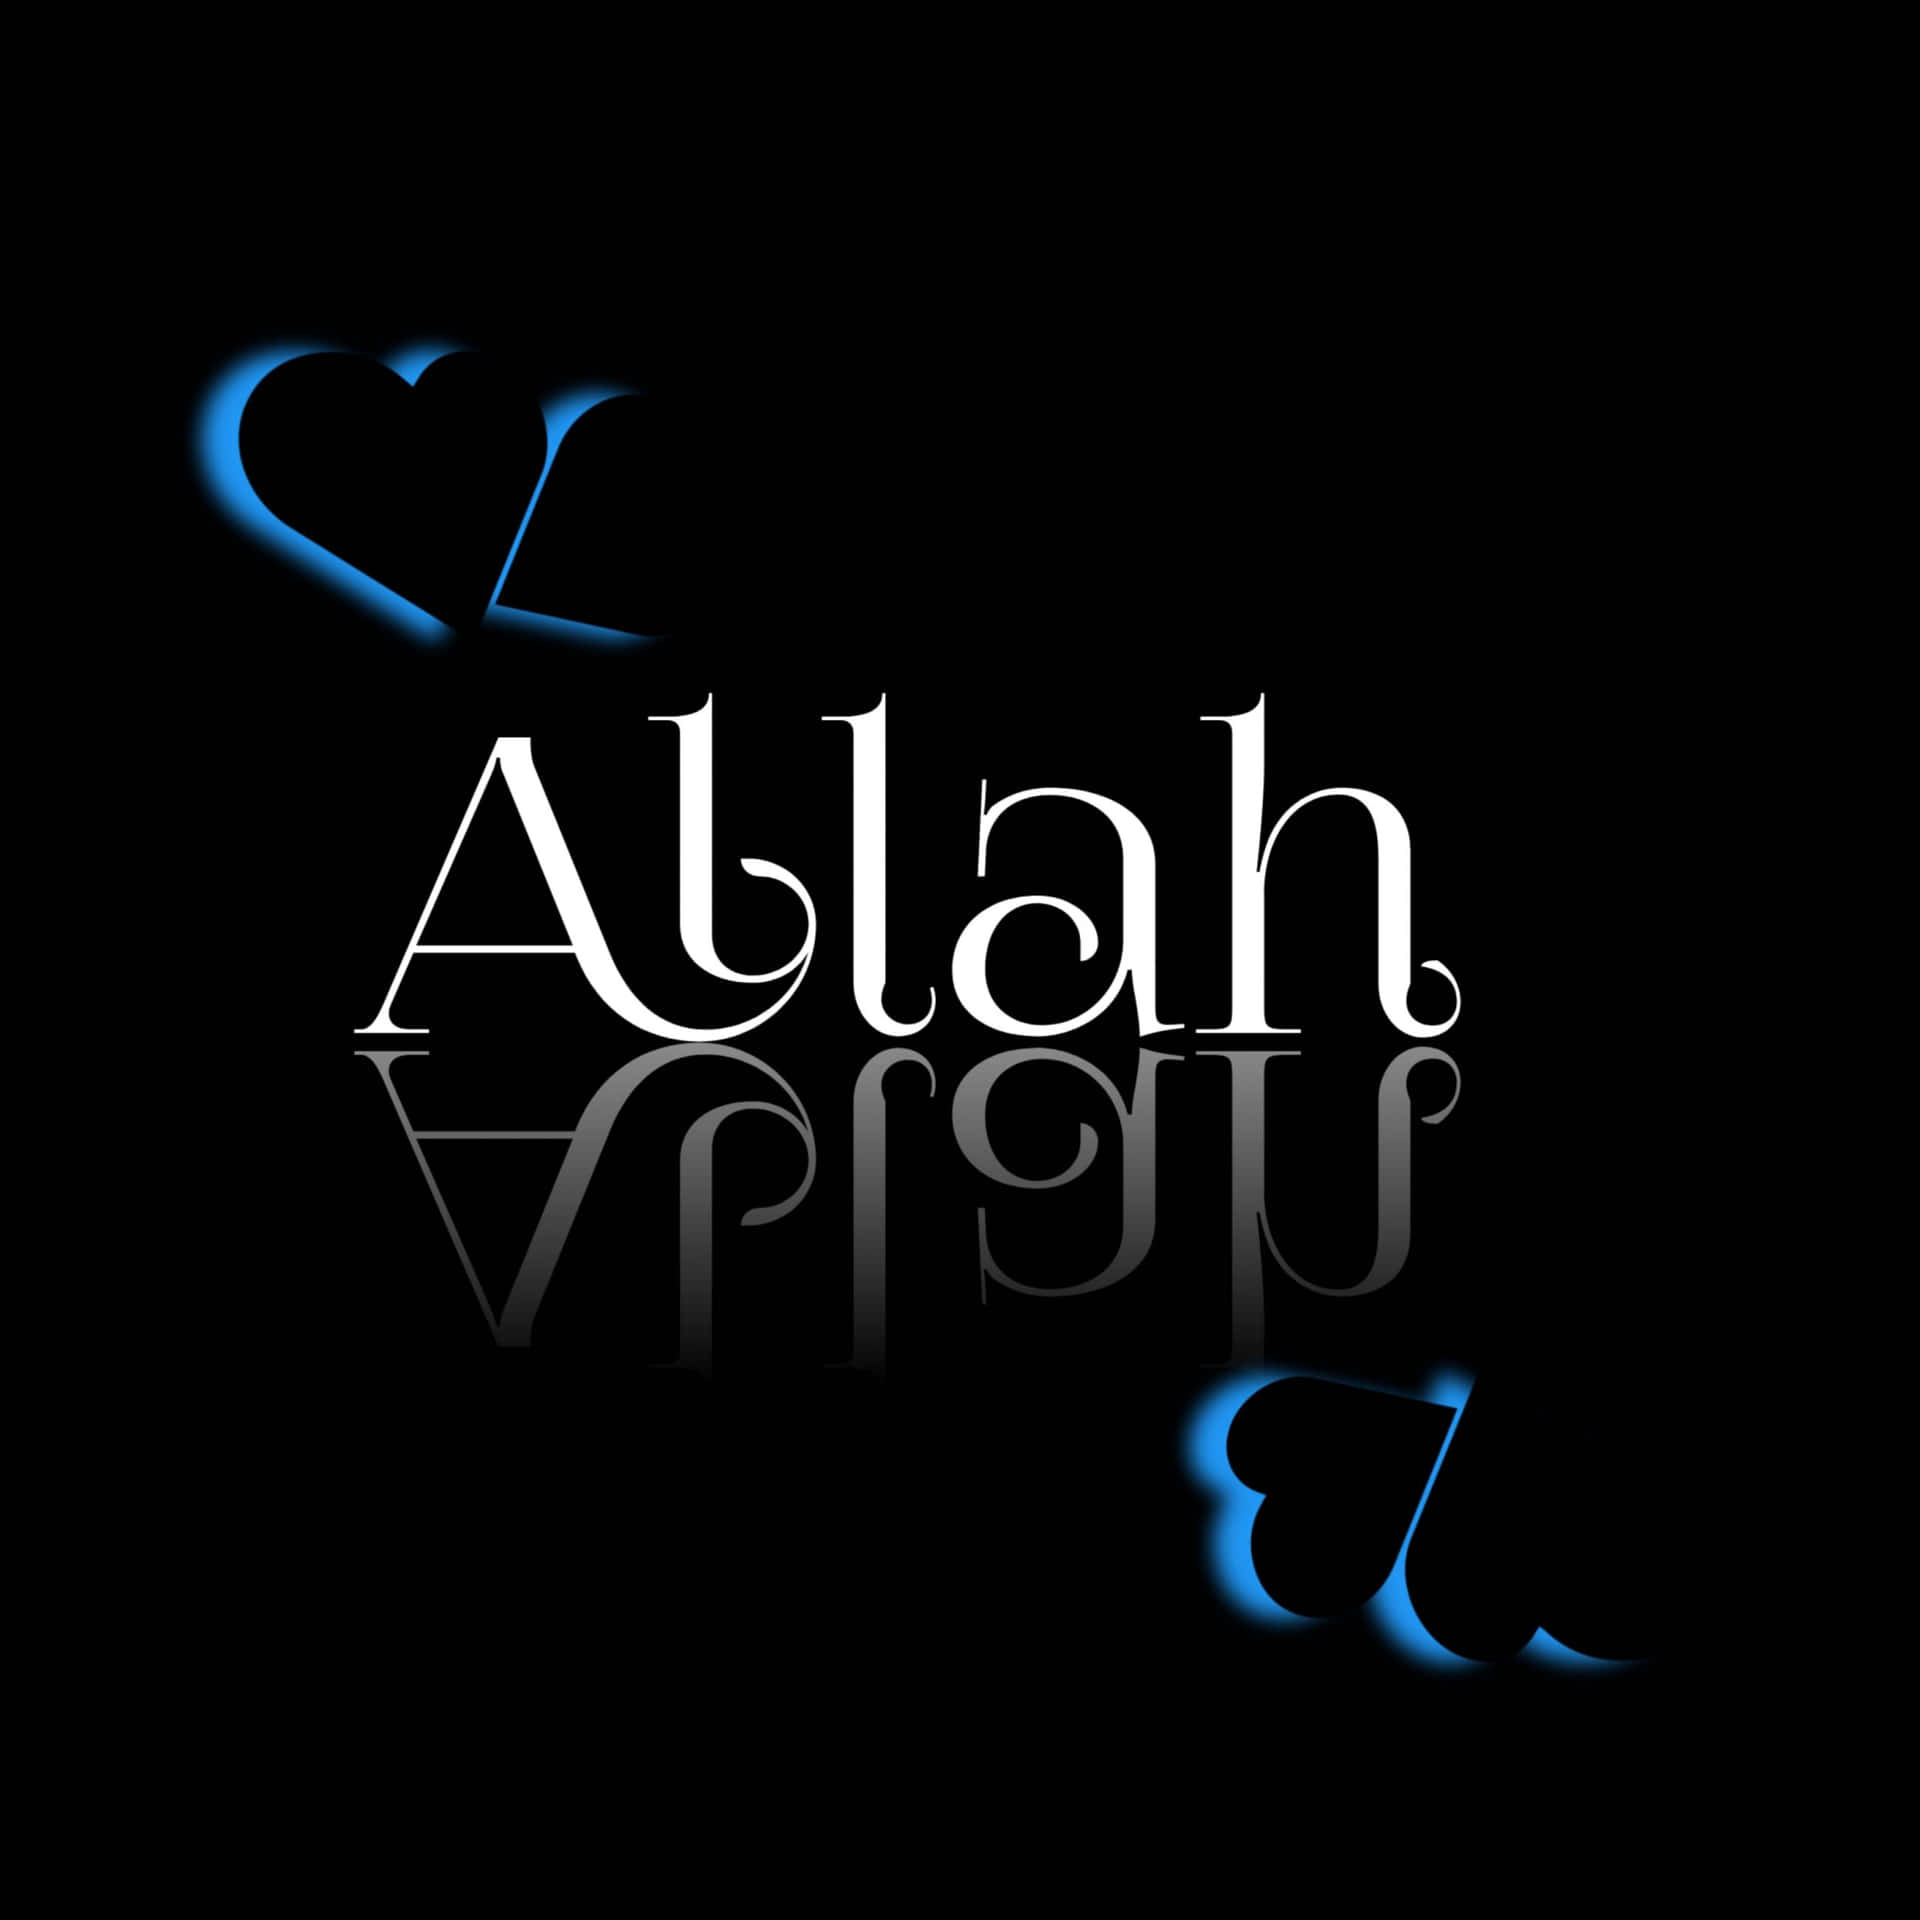 Allah, The All Mighty